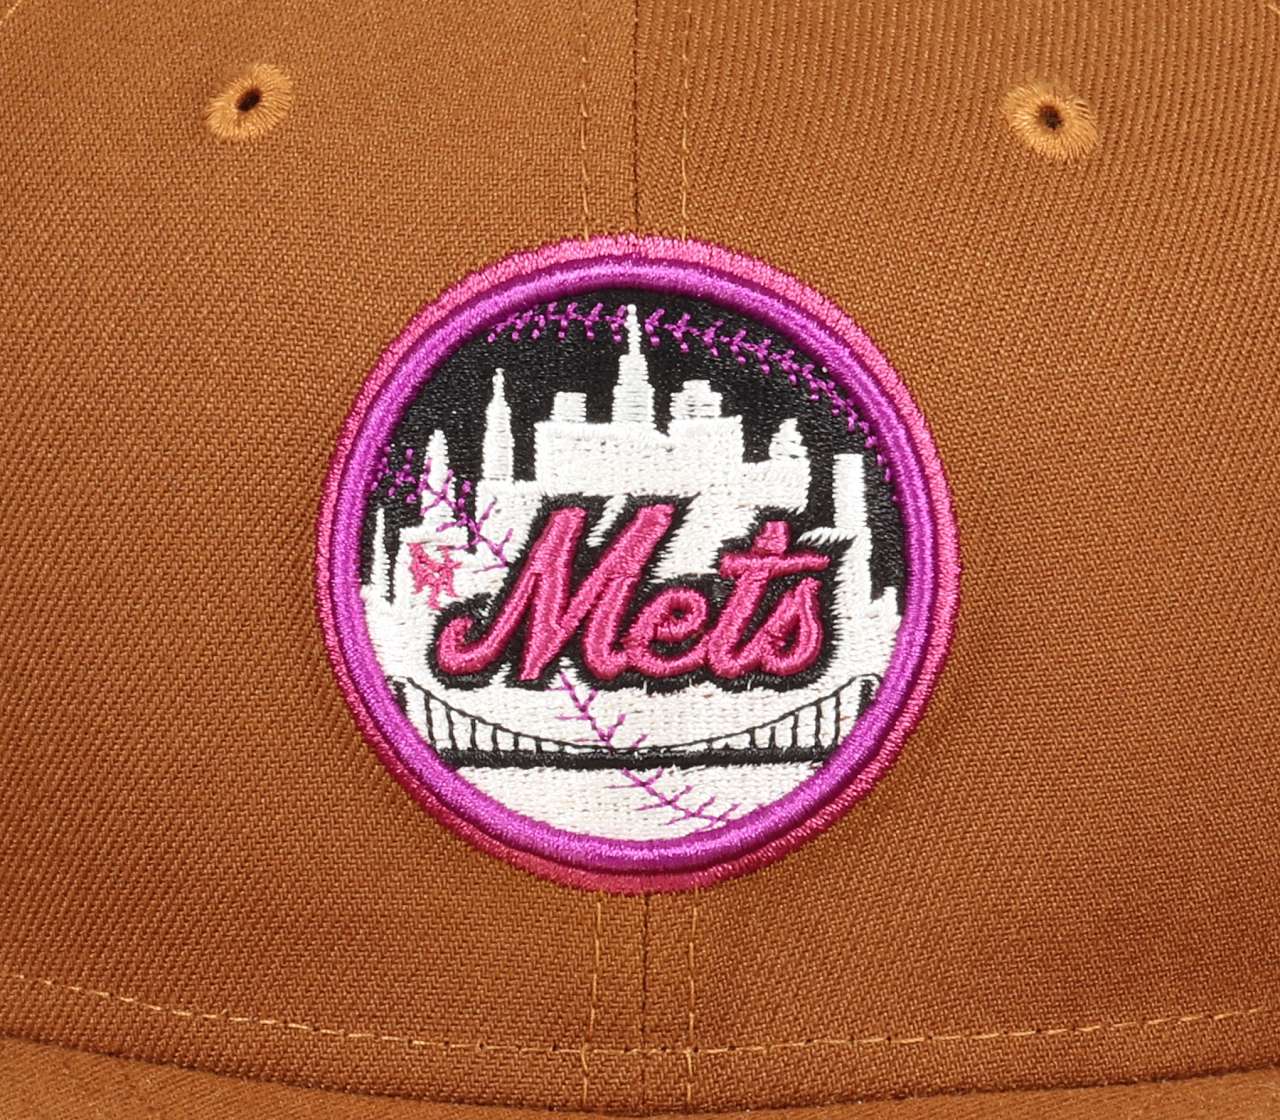 New York Mets MLB 50th Anniversary Sidepatch Toasted Peanut 59Fifty Basecap New Era